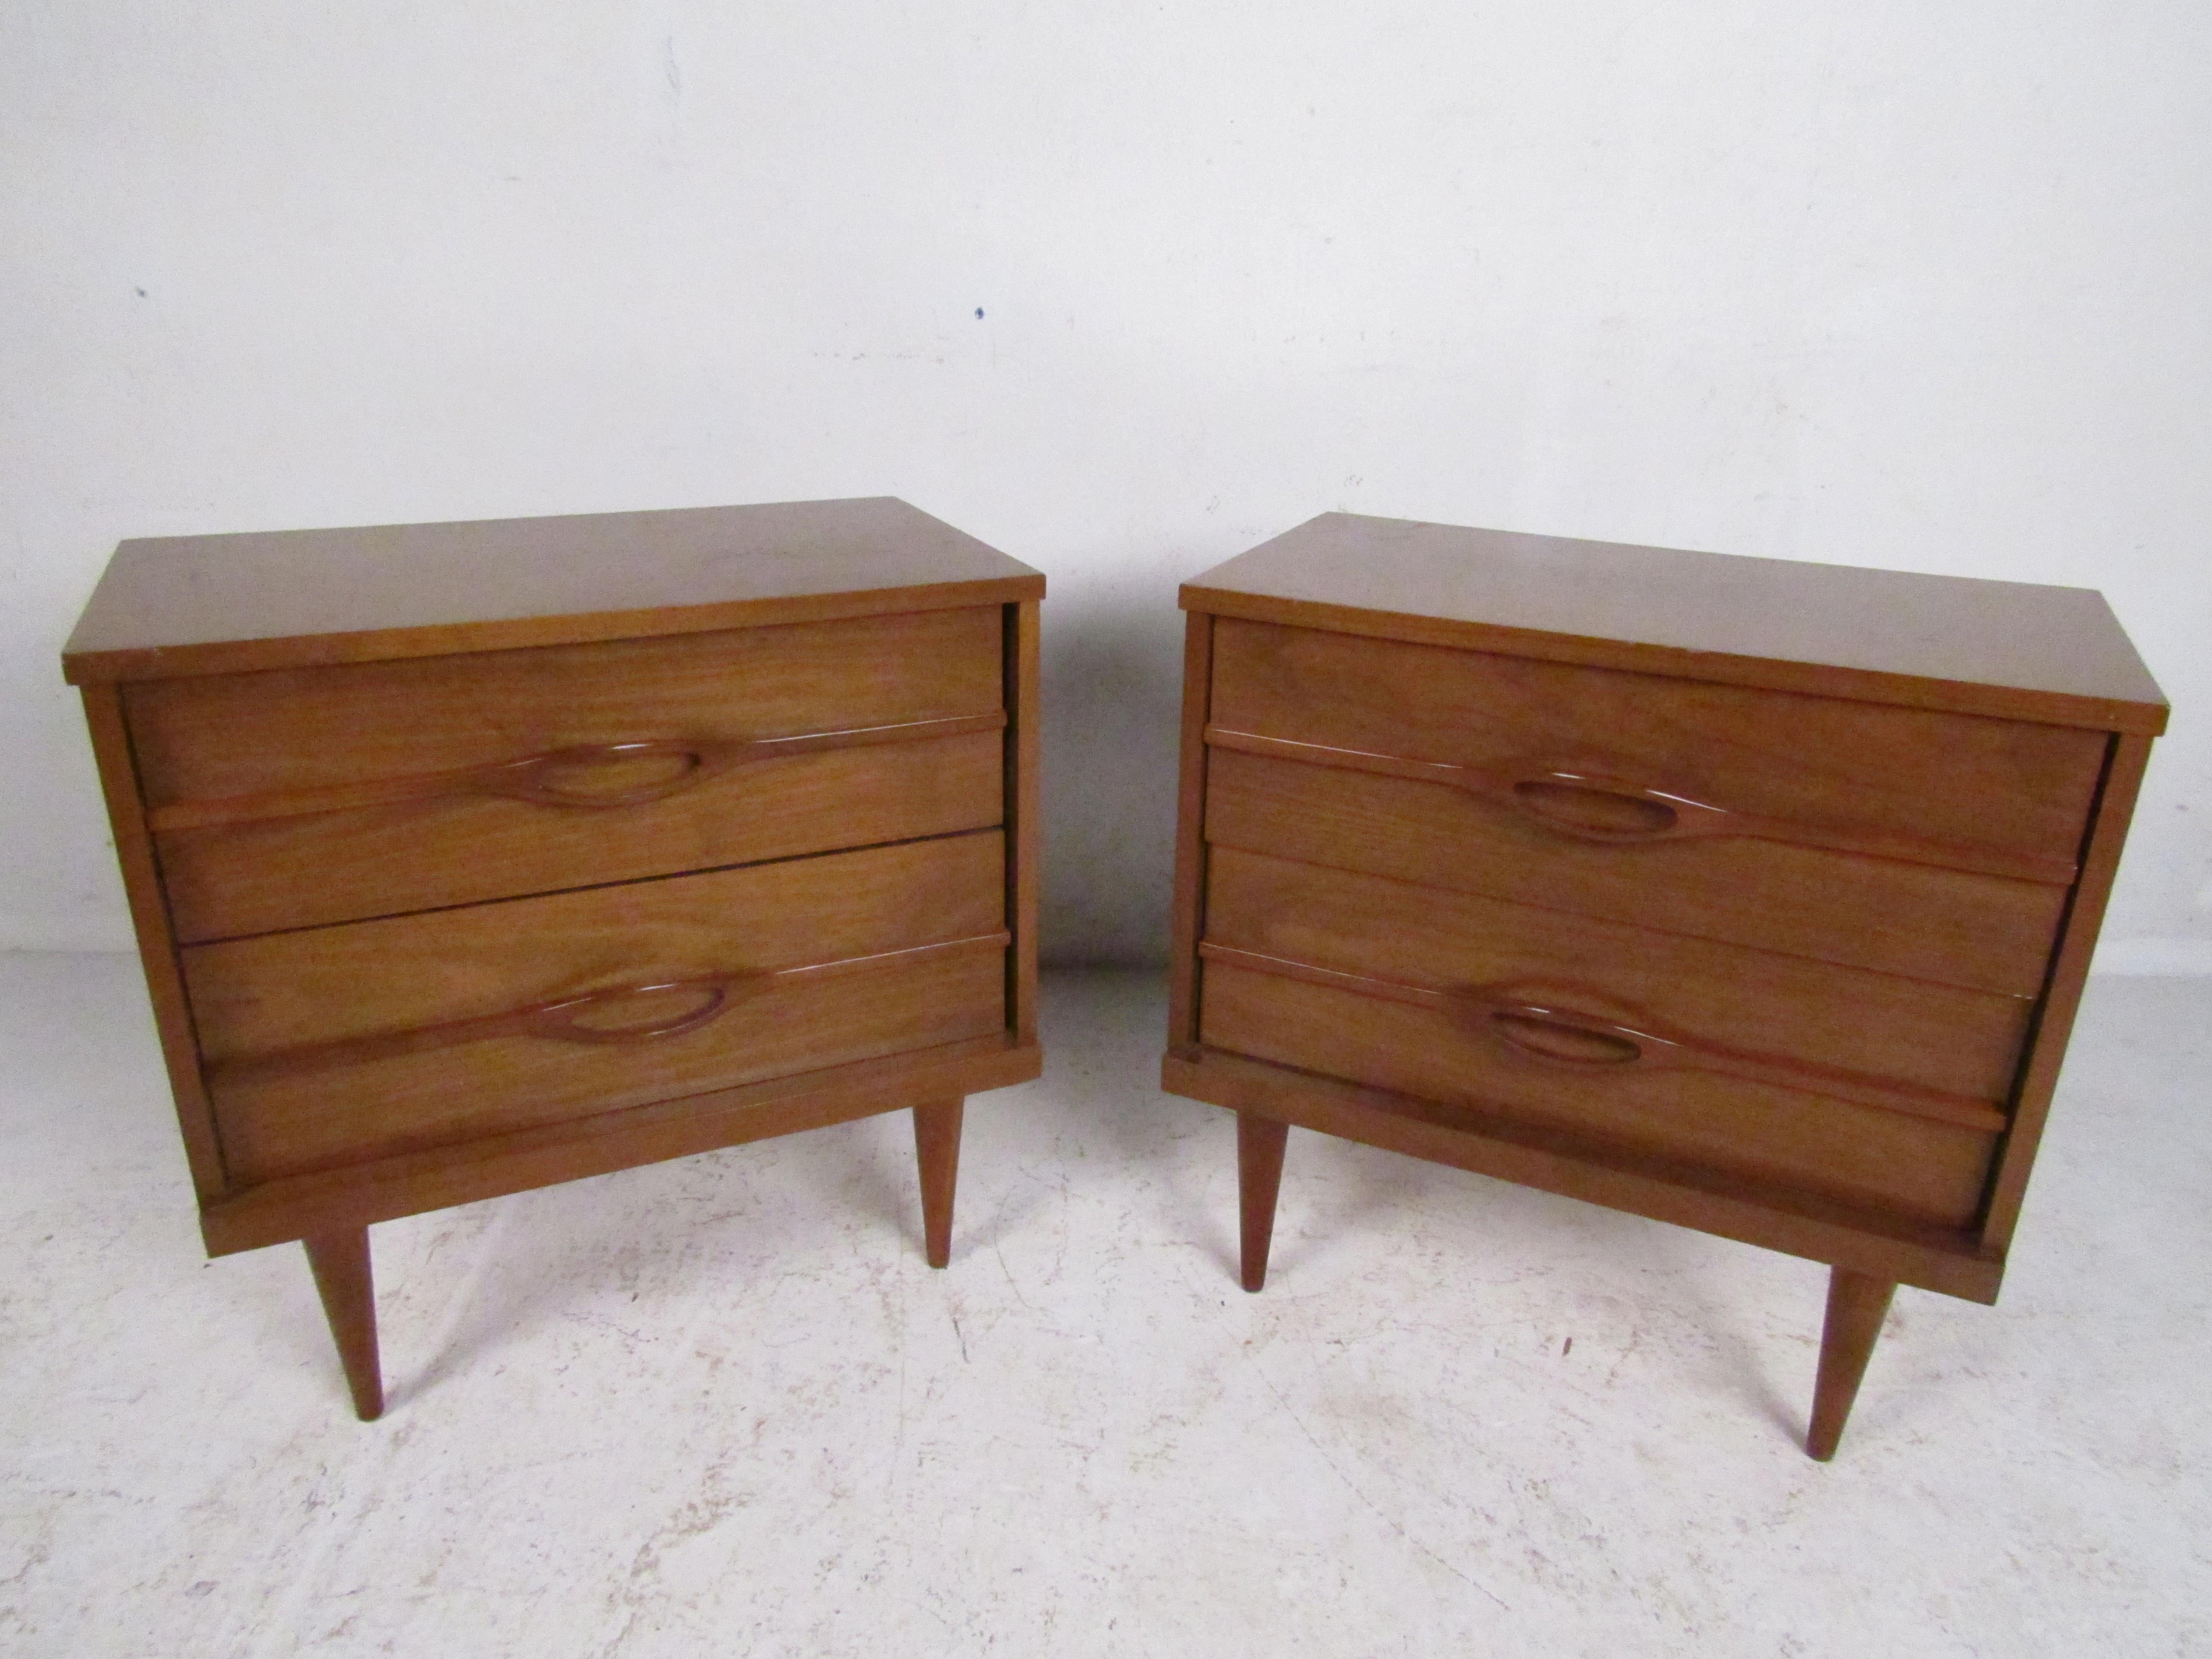 Stylish pair of Mid-Century Modern nightstands. Sturdily constructed frames with a nice walnut veneer exterior. Two drawers on each Stand with sculpted drawer pulls. This pair is sure to be a nice addition to any modern interior. Please confirm item